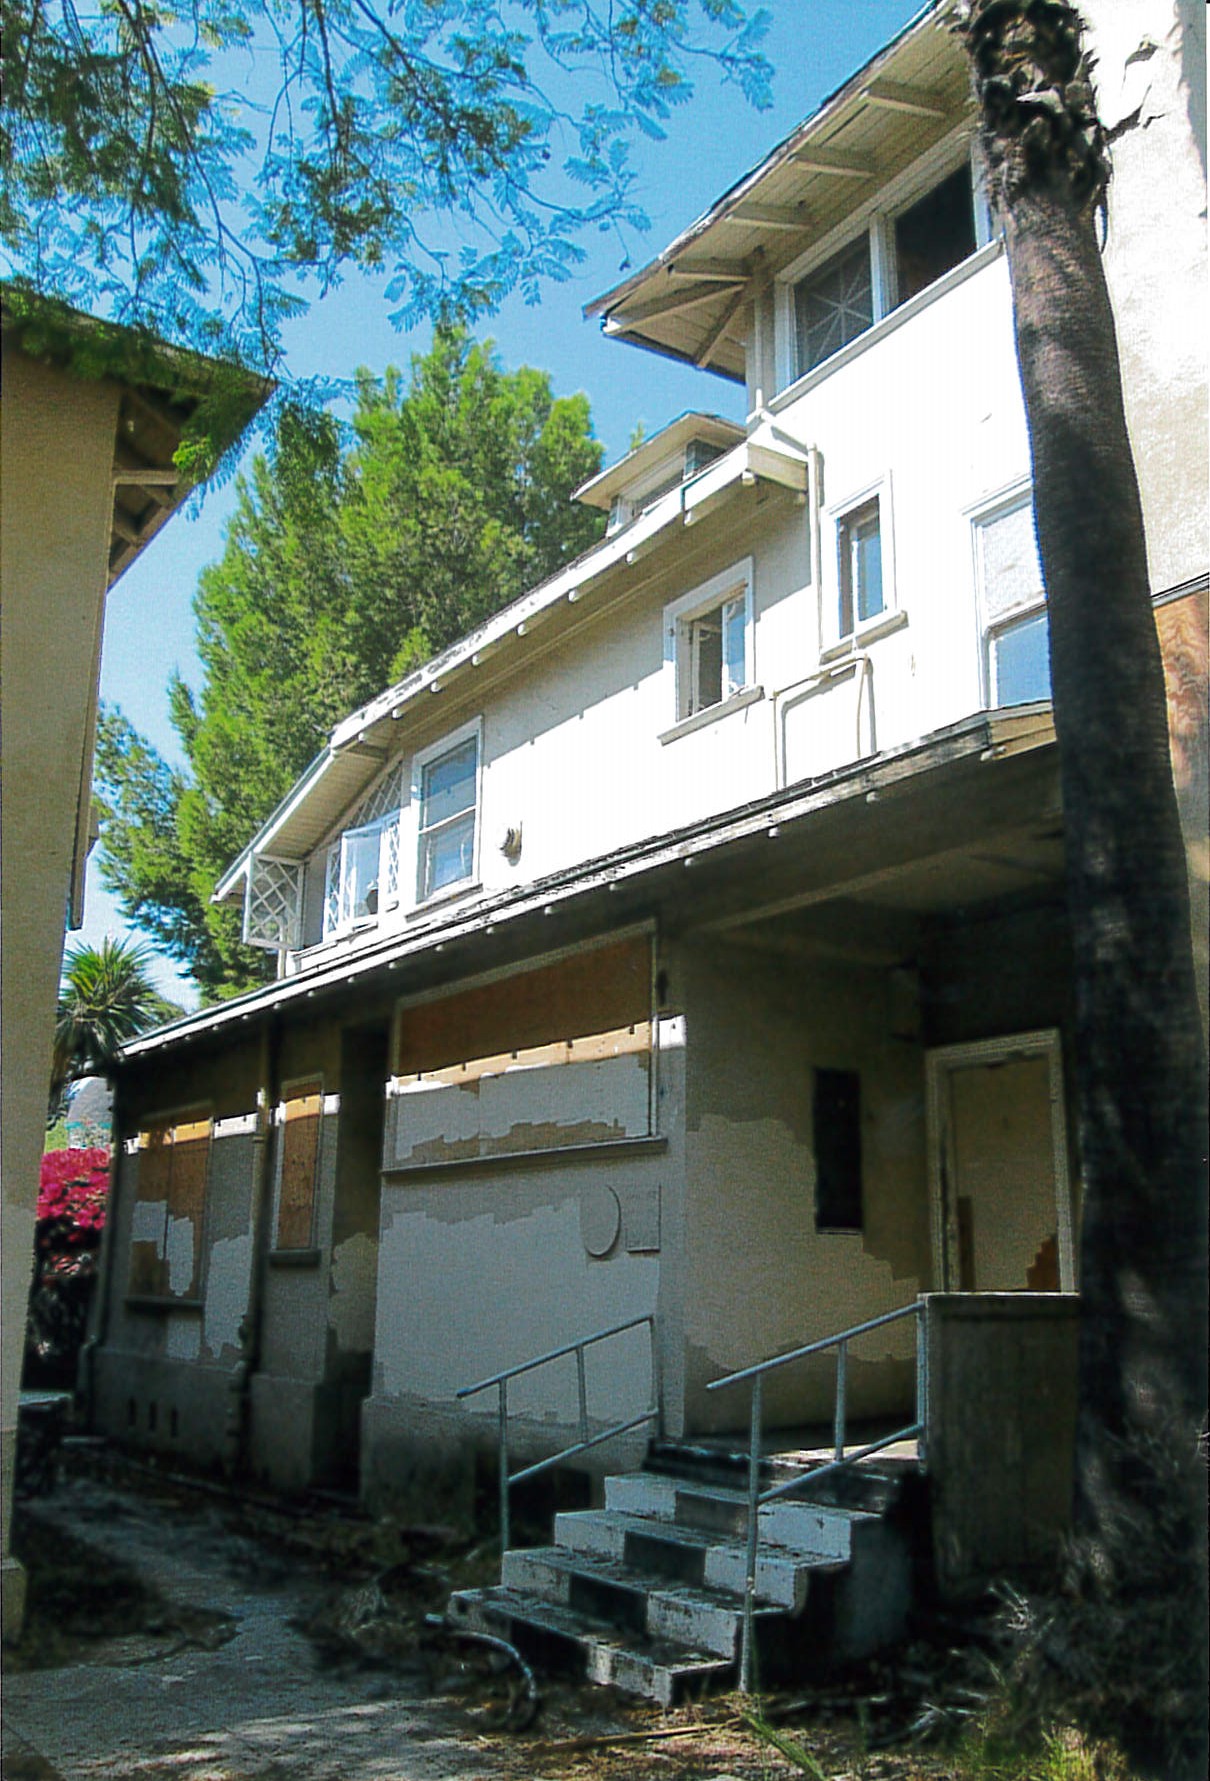 Exterior view, boarded up buildings.